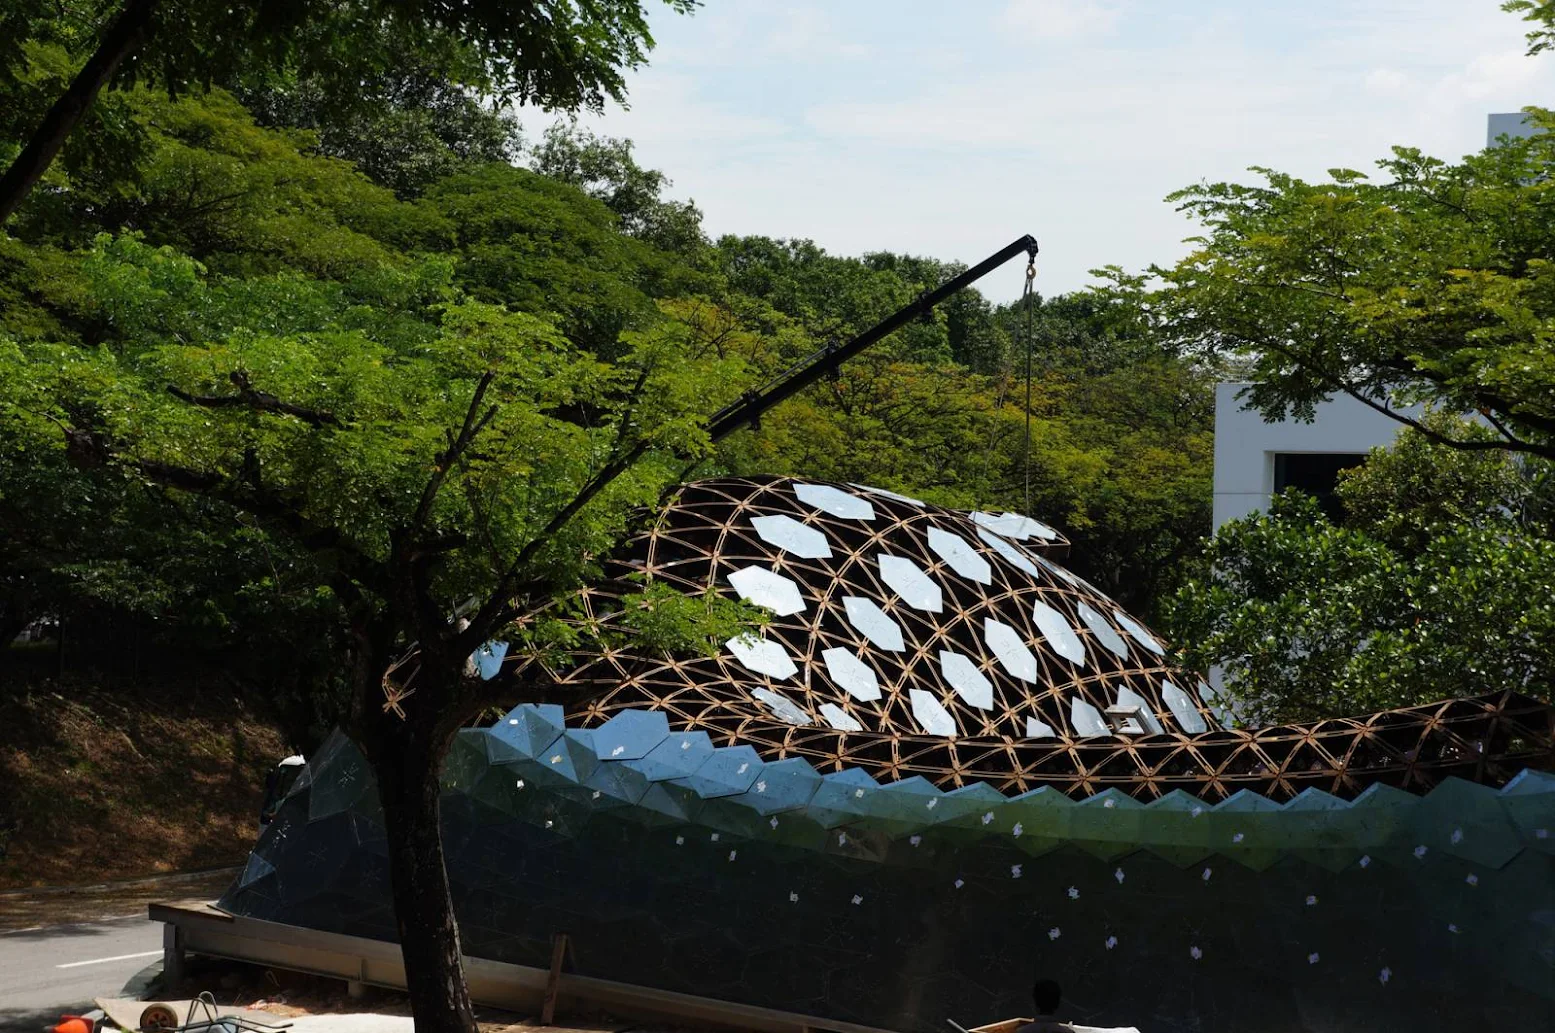 SUTD Library Gridshell Pavilion by City Form Lab